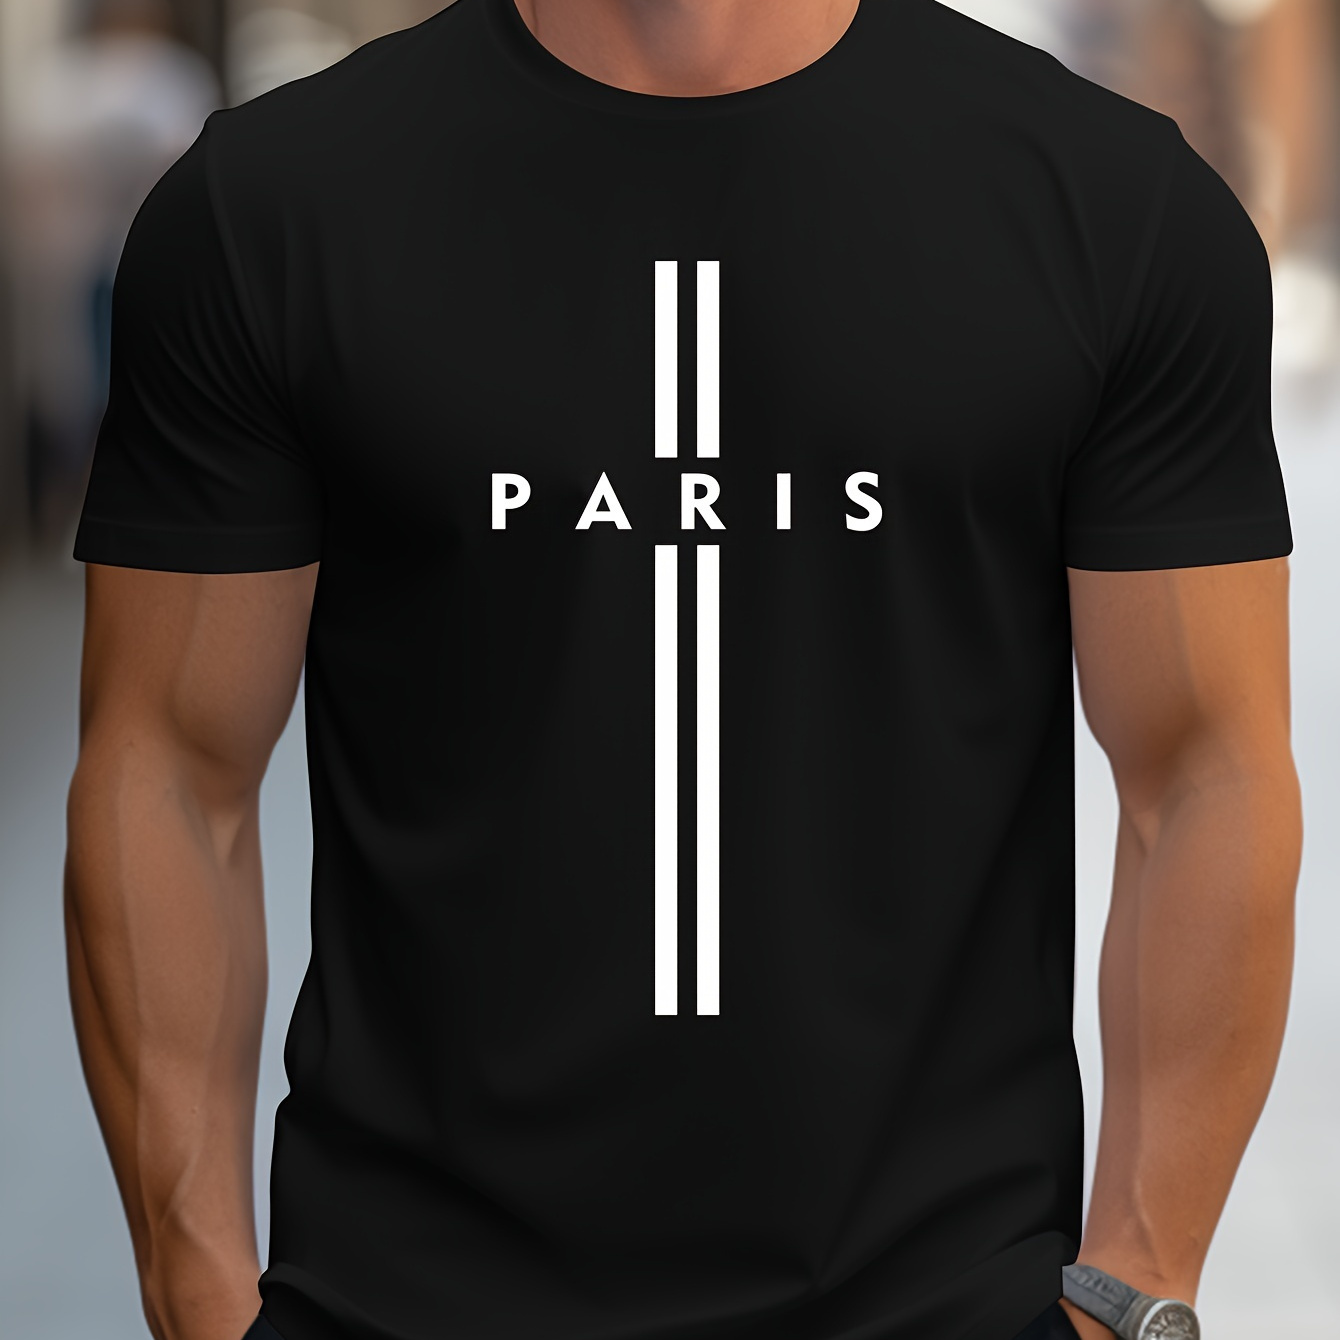 

Paris Creative Stylish Pattern, Men's Round Crew Neck Short Sleeve, Simple Style Tee, Fashion Regular Fit T-shirt, Casual Comfy Top For Spring Summer Holiday Leisure Vacation Men's Clothing As Gift